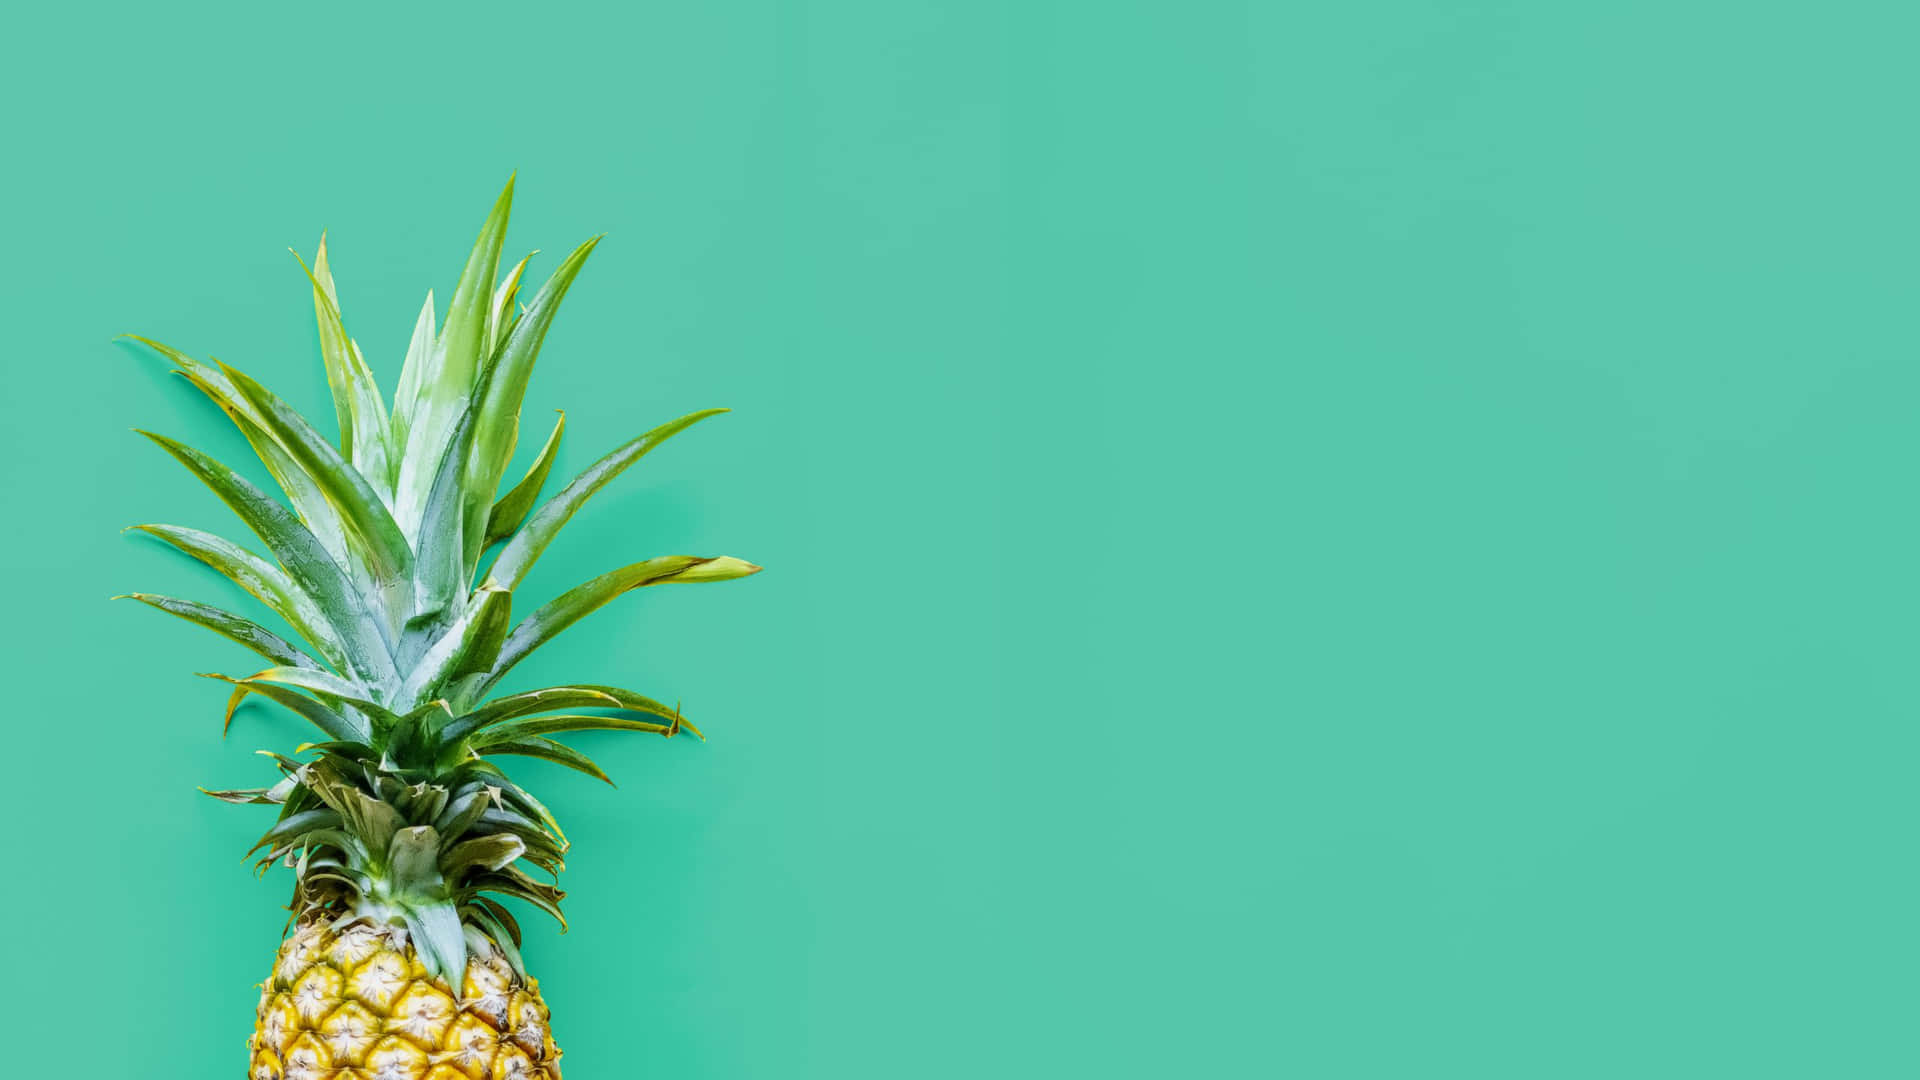 A Pineapple On A Turquoise Background Background